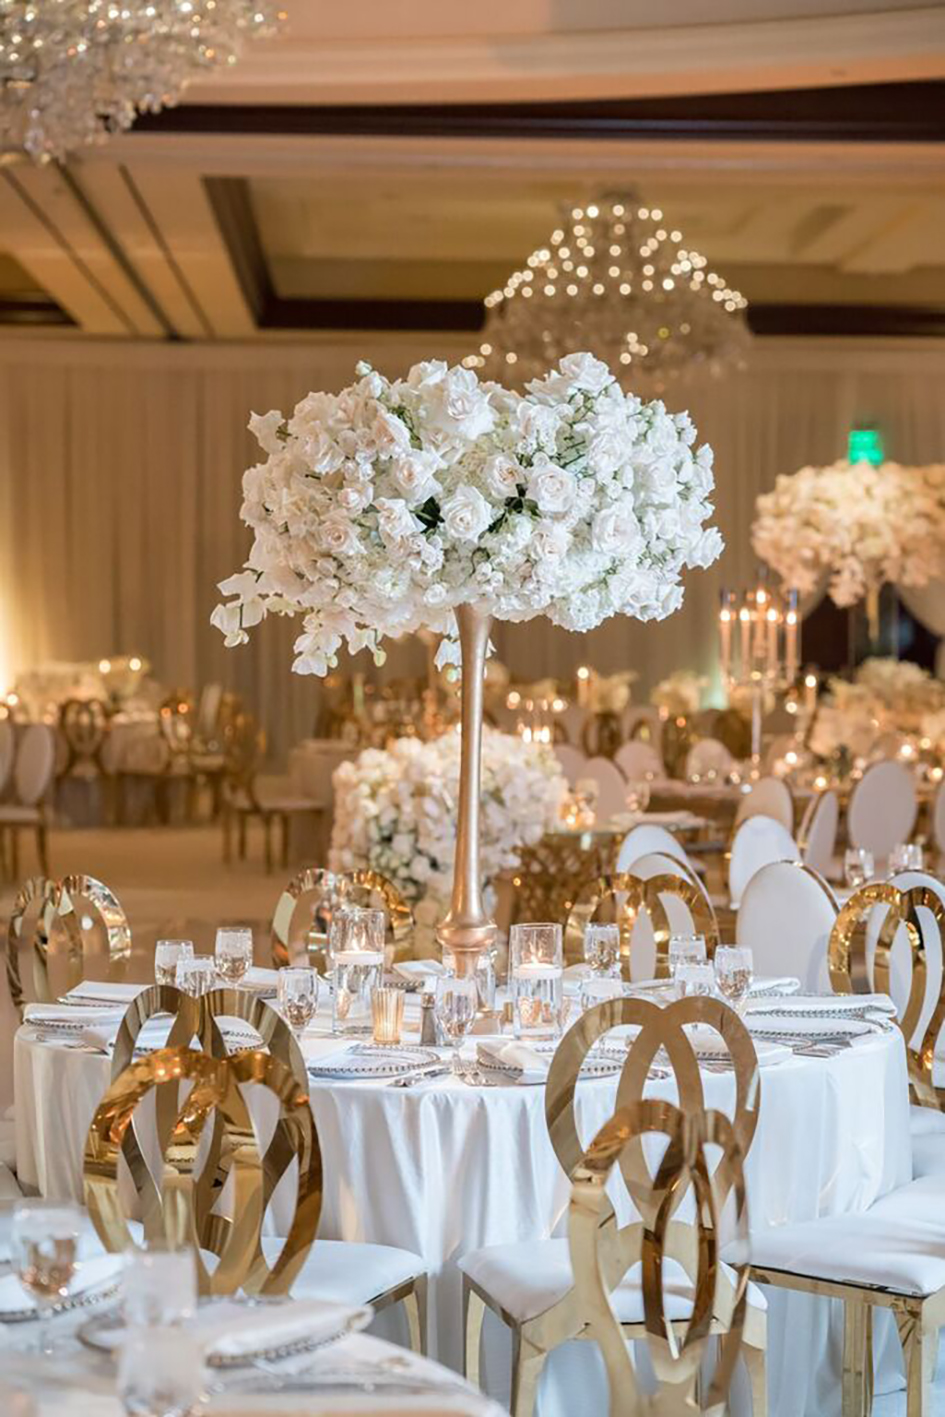 A floral centerpiece at Michael and Neda's wedding at Four Seasons Westlake Village